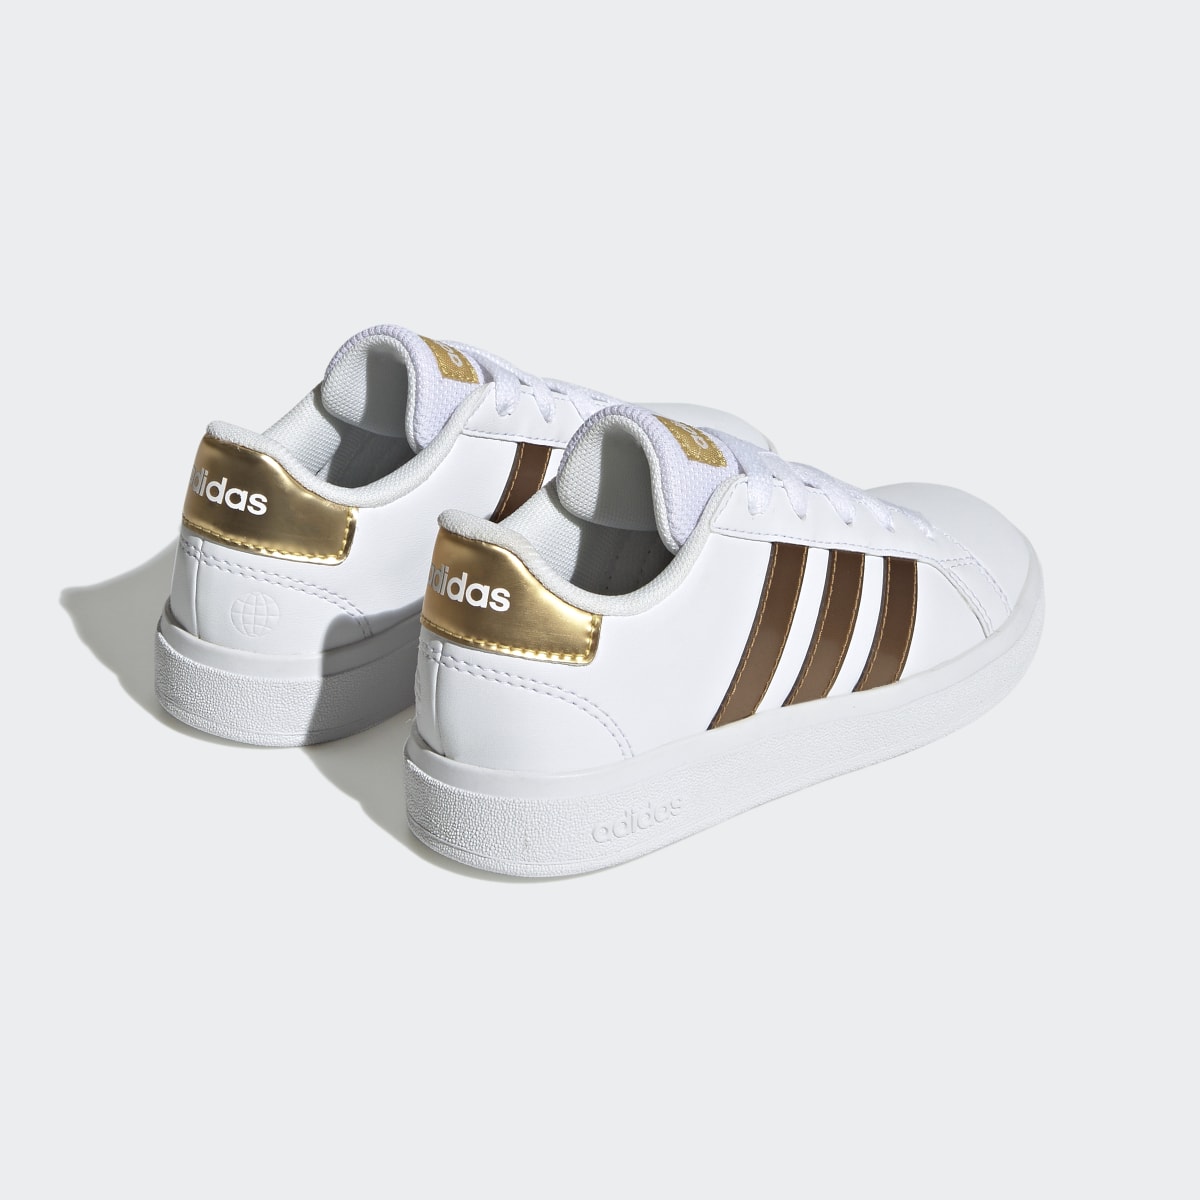 Adidas Grand Court Sustainable Lace Shoes. 6